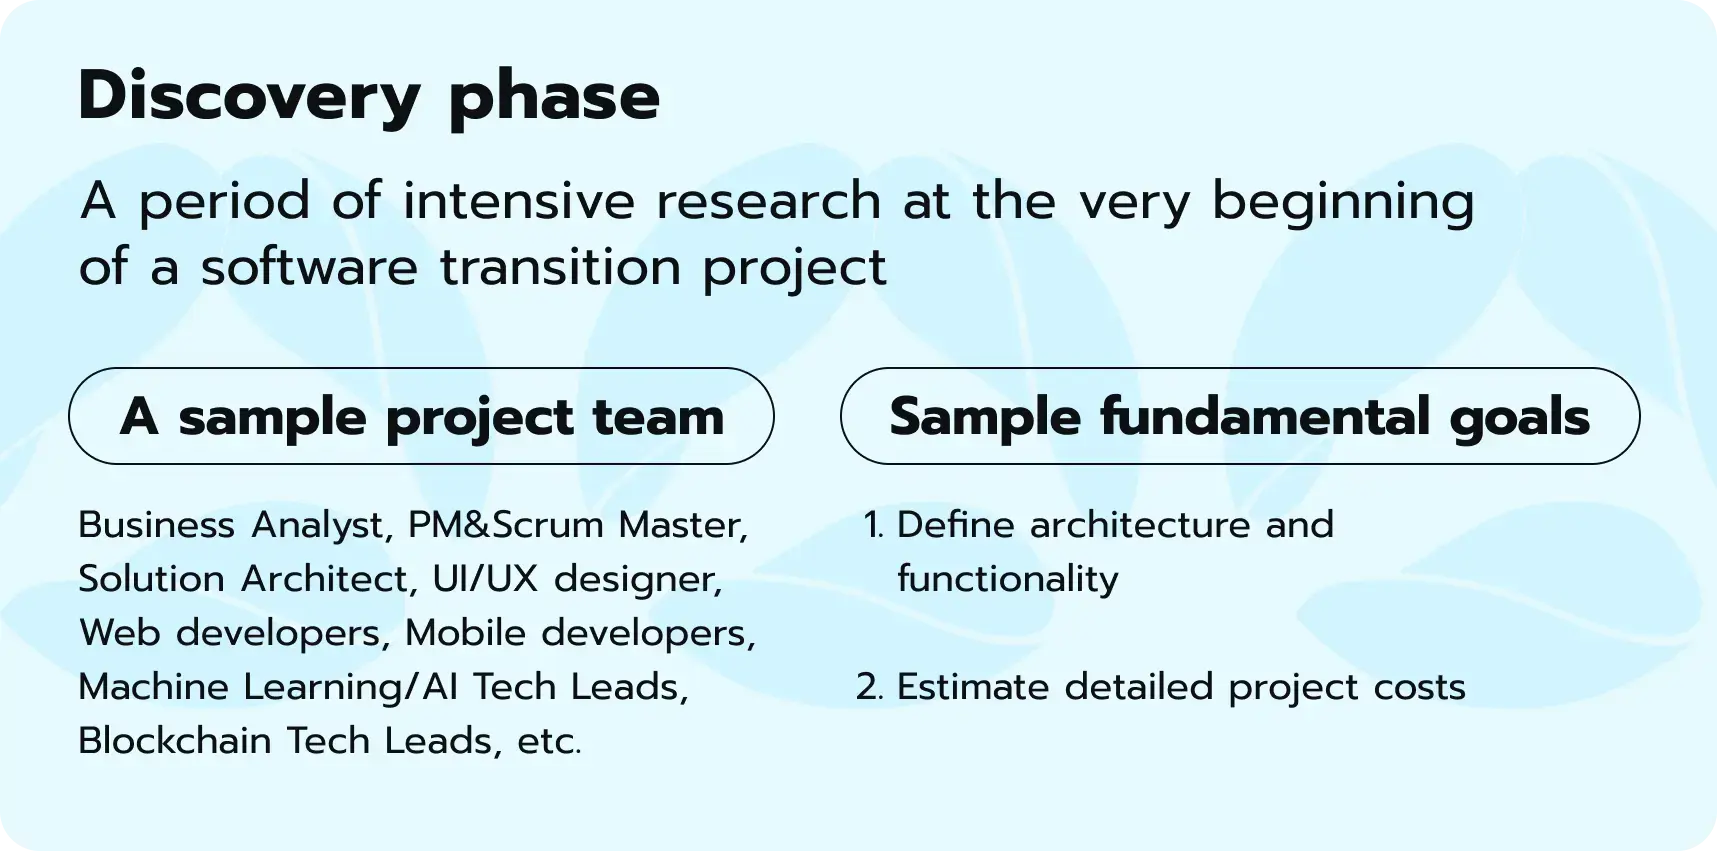 Discovery phase as a part of software transition